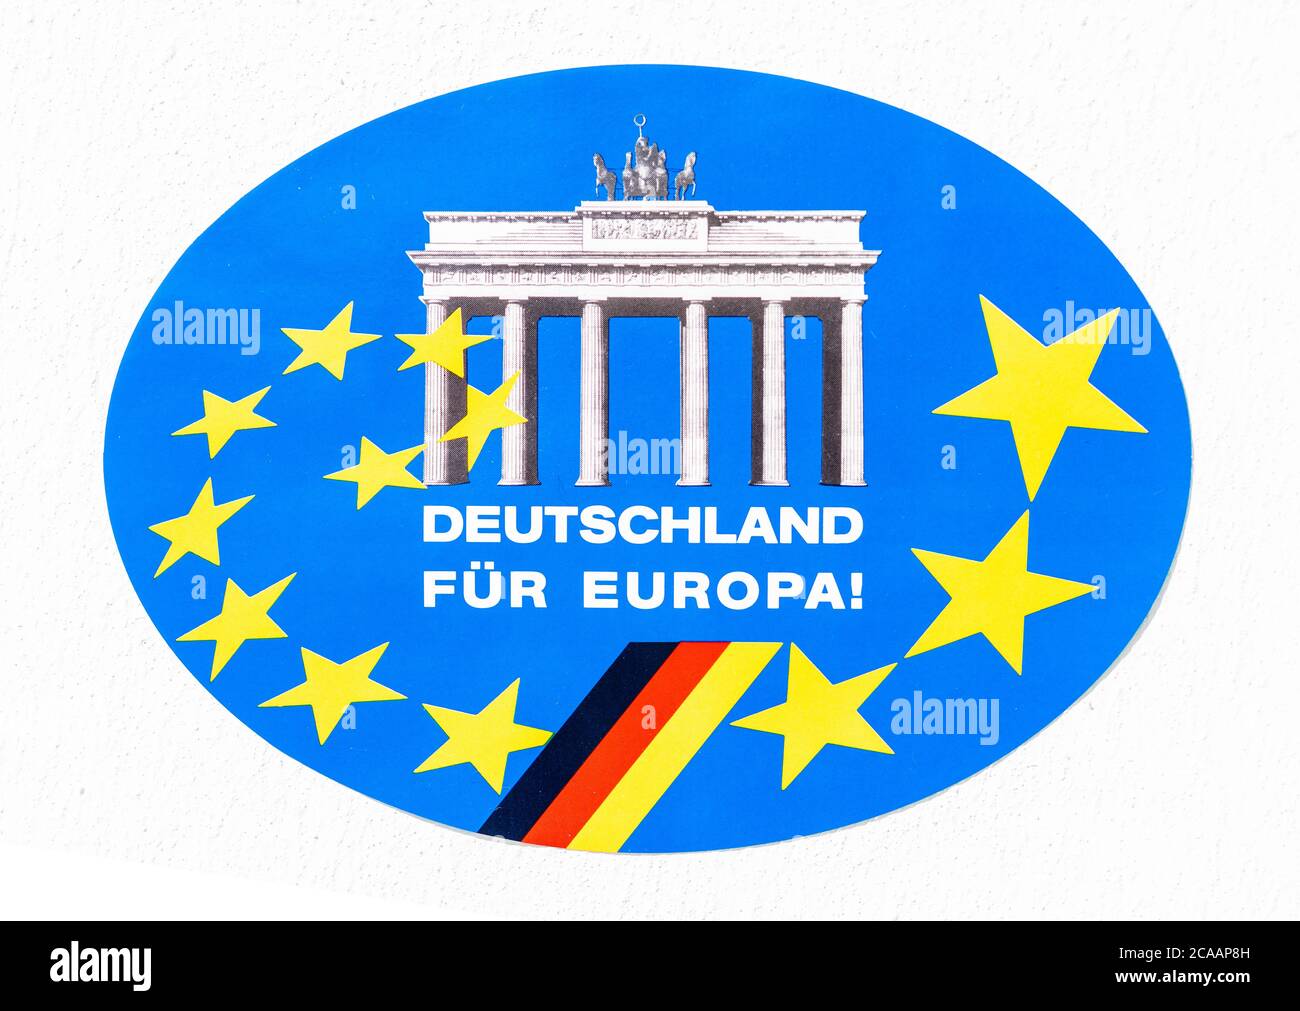 A round vintage sticker in German dating back to 1993 depicting Germany’s commitment to the founding of the European Union on November 1st 1993 – also at the time called the EU12 – the sticker displays the Brandenburg Gate, the German flag and twelve yellow stars on blue background and it reads in German ' Deutschland fuer Europa!' - Germany for Europe! Stock Photo